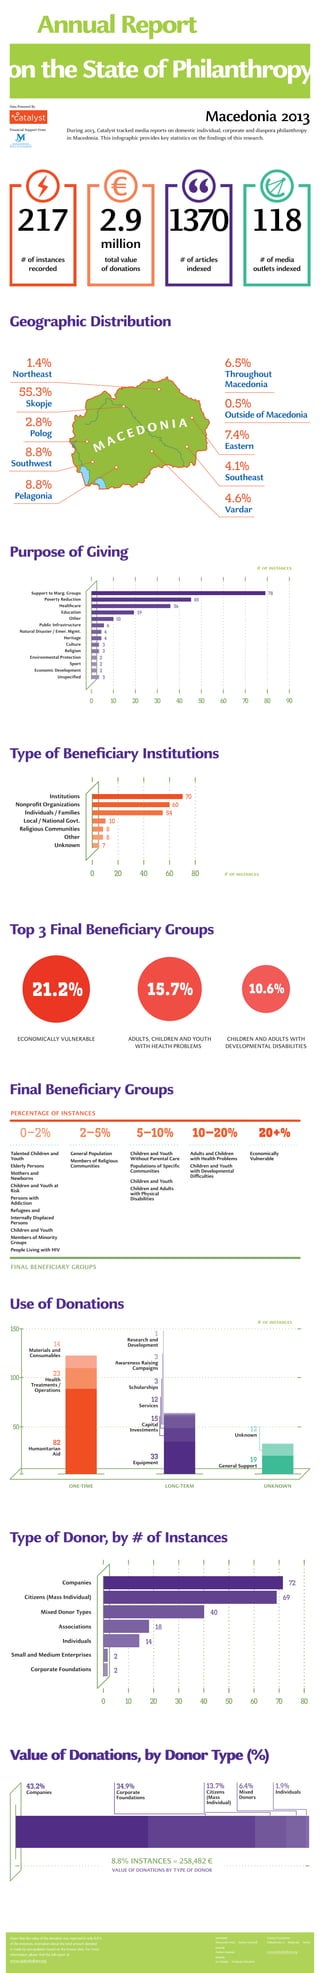 Geographic Distribution
Purpose of Giving
Type of Beneficiary Institutions
Top 3 Final Beneficiary Groups
Final Beneficiary Groups
Use of Donations
Type of Donor, by # of Instances
Value of Donations, by Donor Type (%)
Support to Marg. Groups
Poverty Reduction
Healthcare
Education
Other
Public Infrastructure
Natural Disaster / Emer. Mgmt.
Heritage
Culture
Religion
Environmental Protection
Sport
Economic Development
0 10 20 30 40 50 60 70 80
78
45
36
19
10
6
4
4
3
3
2
2
2
Unspecified
90
3
Institutions
Nonprofit Organizations
Individuals / Families
Local / National Govt.
Religious Communities
Other
Unknown
0 20 40 60 80
70
60
54
10
8
8
7
0–2% 2–5% 5–10% 10–20%
Talented Children and
Youth
Elderly Persons
Mothers and
Newborns
Children and Youth at
Risk
Persons with
Addiction
Refugees and
Internally Displaced
Persons
Children and Youth
Members of Minority
Groups
People Living with HIV
General Population
Members of Religious
Communities
Children and Youth
Without Parental Care
Populations of Specific
Communities
Children and Youth
Children and Adults
with Physical
Disabilities
Adults and Children
with Health Problems
Children and Youth
with Developmental
Difficulties
PERCENTAGE OF INSTANCES
0–2% 2–5% 5–10% 10–20% 20+%
FINAL BENEFICIARY GROUPS
Economically
Vulnerable
14
Materials and
Consumables
3
Scholarships
12
Services
15
Capital
Investments
33
Equipment
12
Unknown
19
General Support
82
Humanitarian
Aid
50
100
150
ONE-TIME LONG-TERM UNKNOWN
23
Health
Treatments /
Operations
3
Awareness Raising
Campaigns
1
Research and
Development
Citizens (Mass Individual)
Mixed Donor Types
Companies
Associations
Individuals
Small and Medium Enterprises
Corporate Foundations
0 10 20 30 40 50
72
69
40
18
14
2
2
60 70 80
43.2%
Companies
34.9%
Corporate
Foundations
13.7%
Citizens
(Mass
Individual)
6.4%
Mixed
Donors
1.9%
Individuals
8.8% INSTANCES = 258,482 €
VALUE OF DONATIONS BY TYPE OF DONOR
1370 1182.9million
217
# of instances
recorded
# of articles
indexed
# of media
outlets indexed
total value
of donations
21.2% 15.7% 10.6%
ECONOMICALLY VULNERABLE ADULTS, CHILDREN AND YOUTH
WITH HEALTH PROBLEMS
CHILDREN AND ADULTS WITH
DEVELOPMENTAL DISABILITIES
1370 1182.9million
217
# of instances
recorded
# of articles
indexed
# of media
outlets indexed
total value
of donations
Annual Report
on the State of Philanthropy
M A C E D O N I A
8.8%
Southwest
6.5%
Throughout
Macedonia
2.8%
Polog
0.5%
Outside of Macedonia
55.3%
Skopje
4.6%
Vardar
7.4%
Eastern
4.1%
Southeast
8.8%
Pelagonia
1.4%
Northeast
# of instances
# of instances
# of instances
Macedonia 2013
During 2013, Catalyst tracked media reports on domestic individual, corporate and diaspora philanthropy
in Macedonia. This infographic provides key statistics on the findings of this research.
Data Powered By
Financial Support From
Value of Donations, by Donor Type (%)
Catalyst Foundation
Makedonska 21  Belegrade Serbia
www.catalystbalkans.org
authors
Aleksandra Vesić  Nathan Koeshall
editor
Nathan Koeshall
design
Ivo Matejin  Fondacija Dokukino
Given that the value of the donation was reported in only 8.8%
of the instances, estimation about the total amount donated
is made by extrapolation based on the known data. For more
information, please find the full report at
www.catalystbalkans.org
 